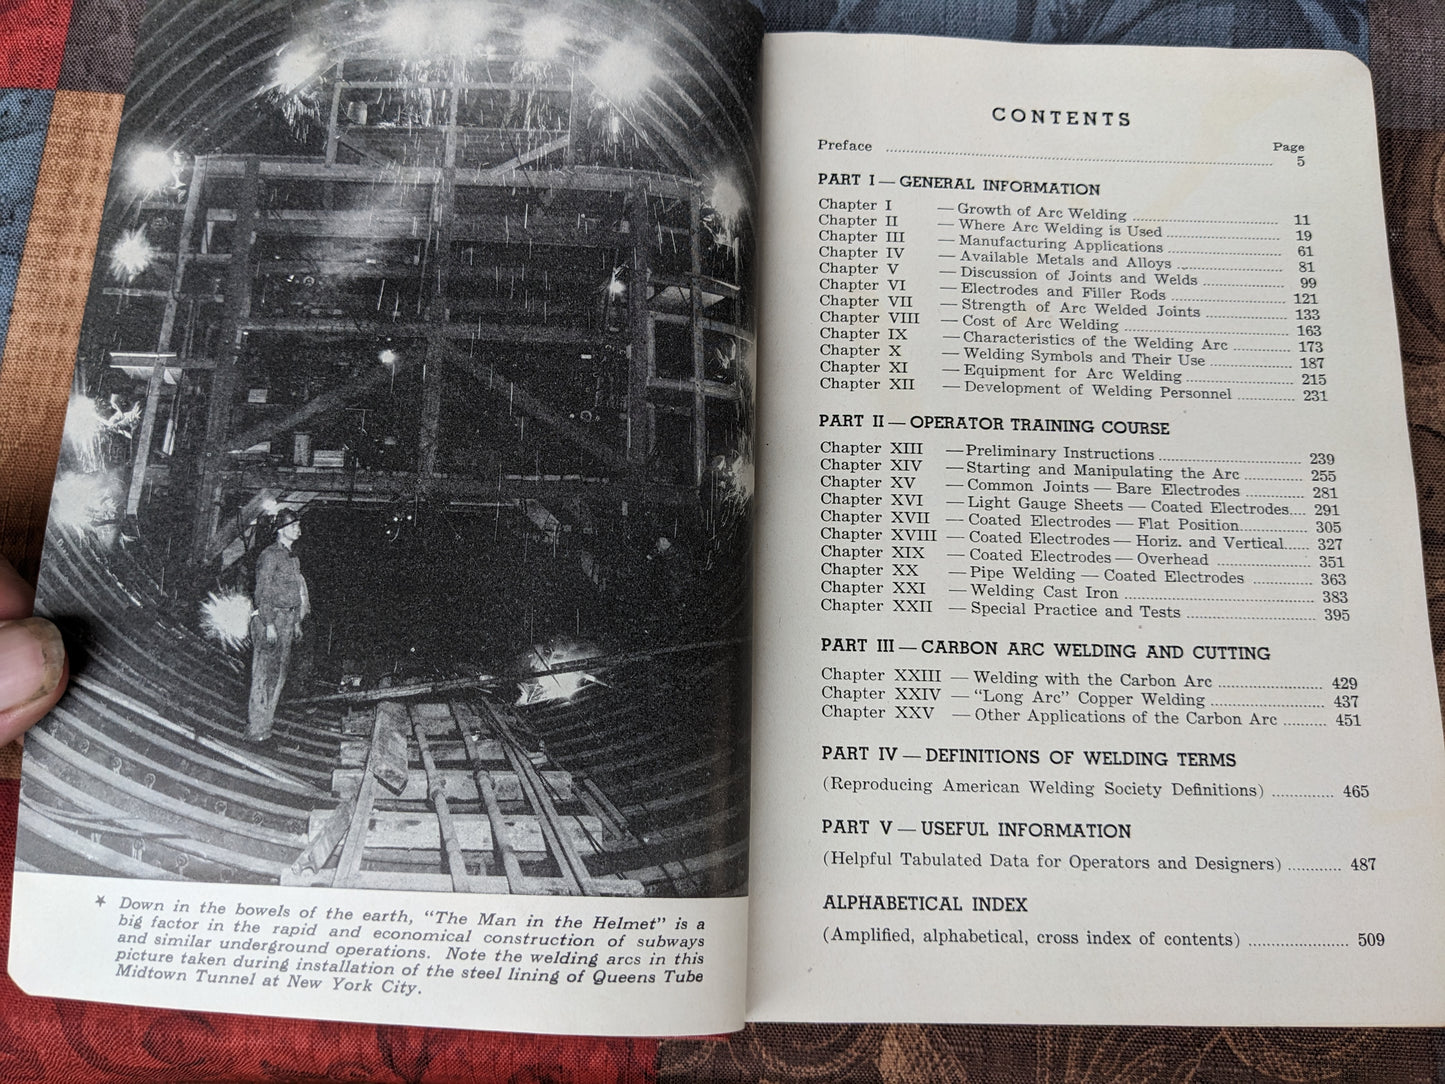 Practical Arc Welding, A Text Book by Hobart Trade School, 1942